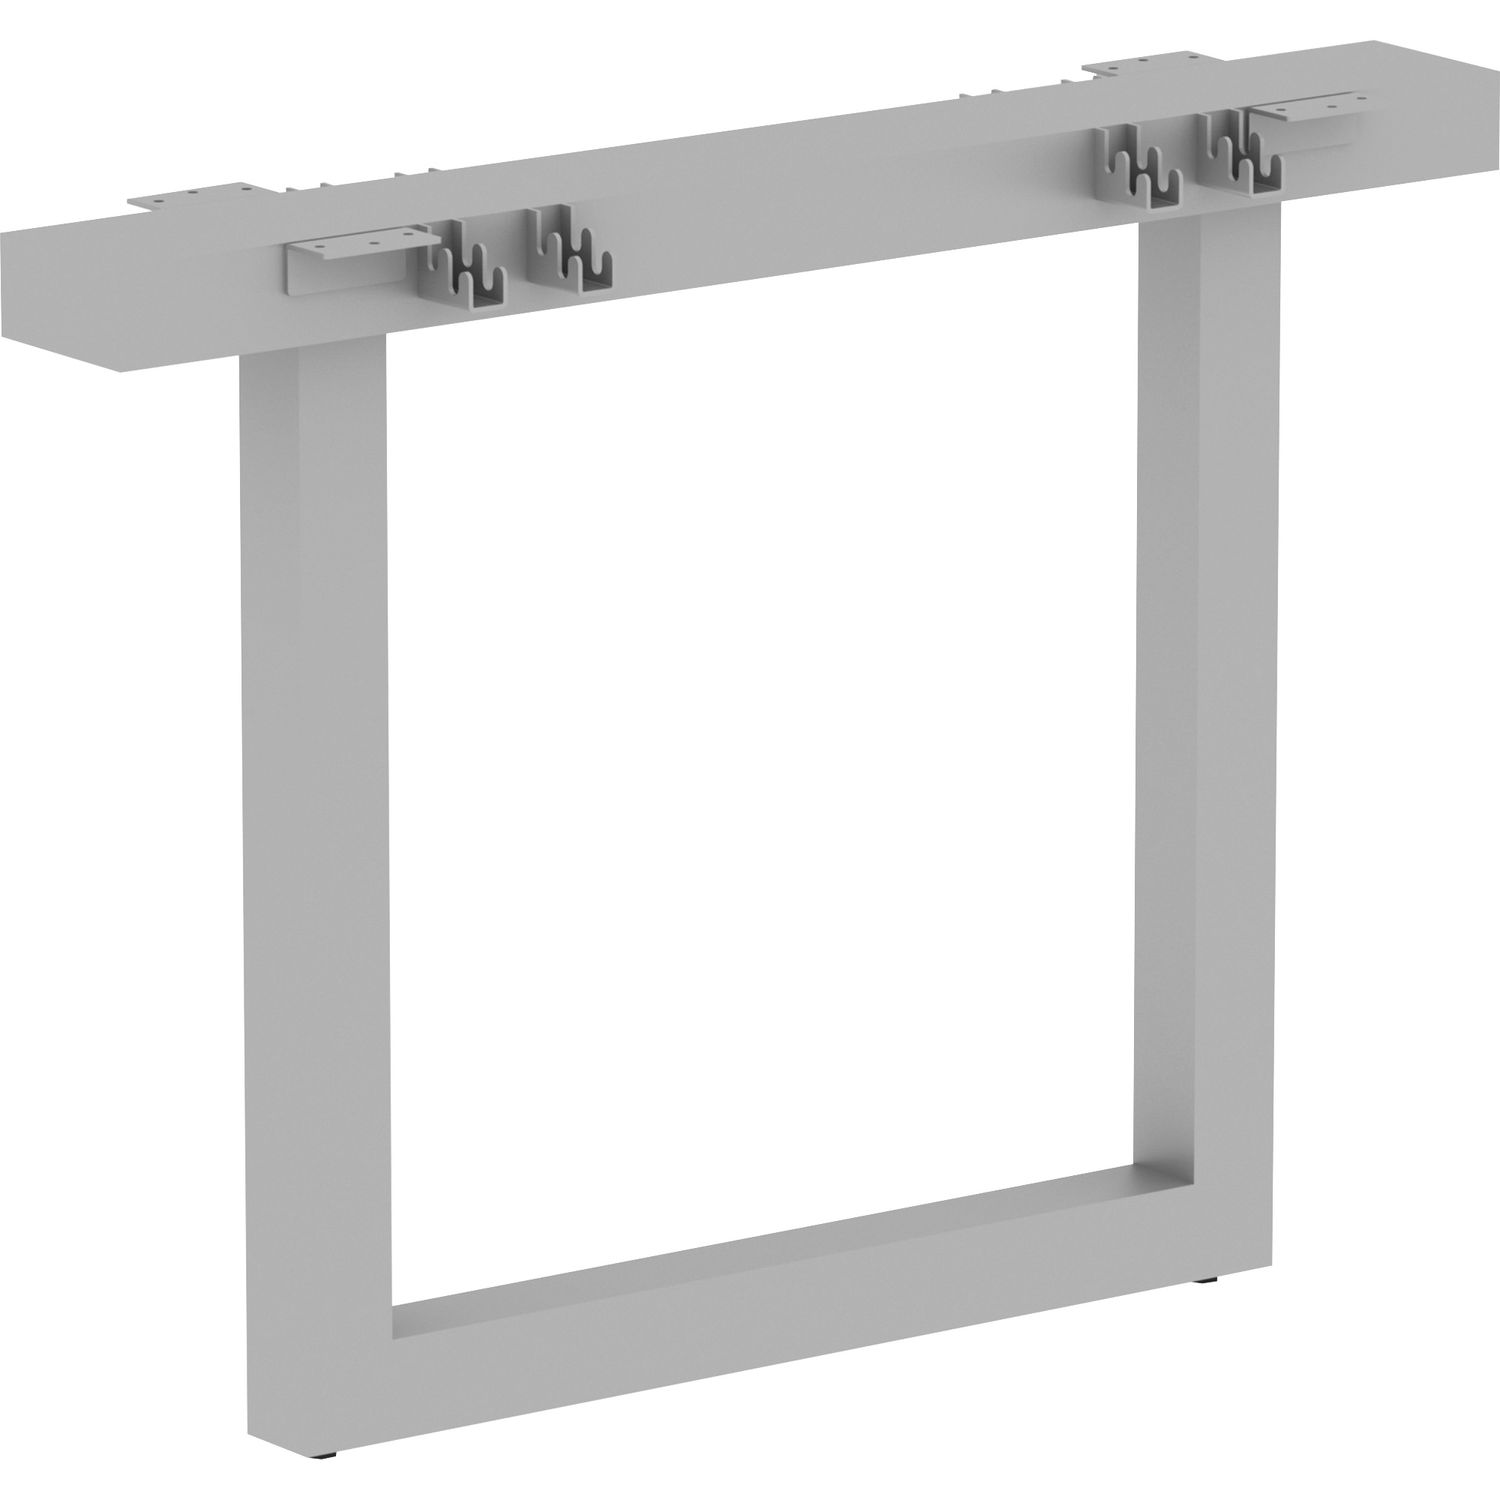 Relevance Series Middle Unite Leg 38.6" x 6.3" x 28.5", Material: Metal Frame, Finish: Silver, Powder Coated